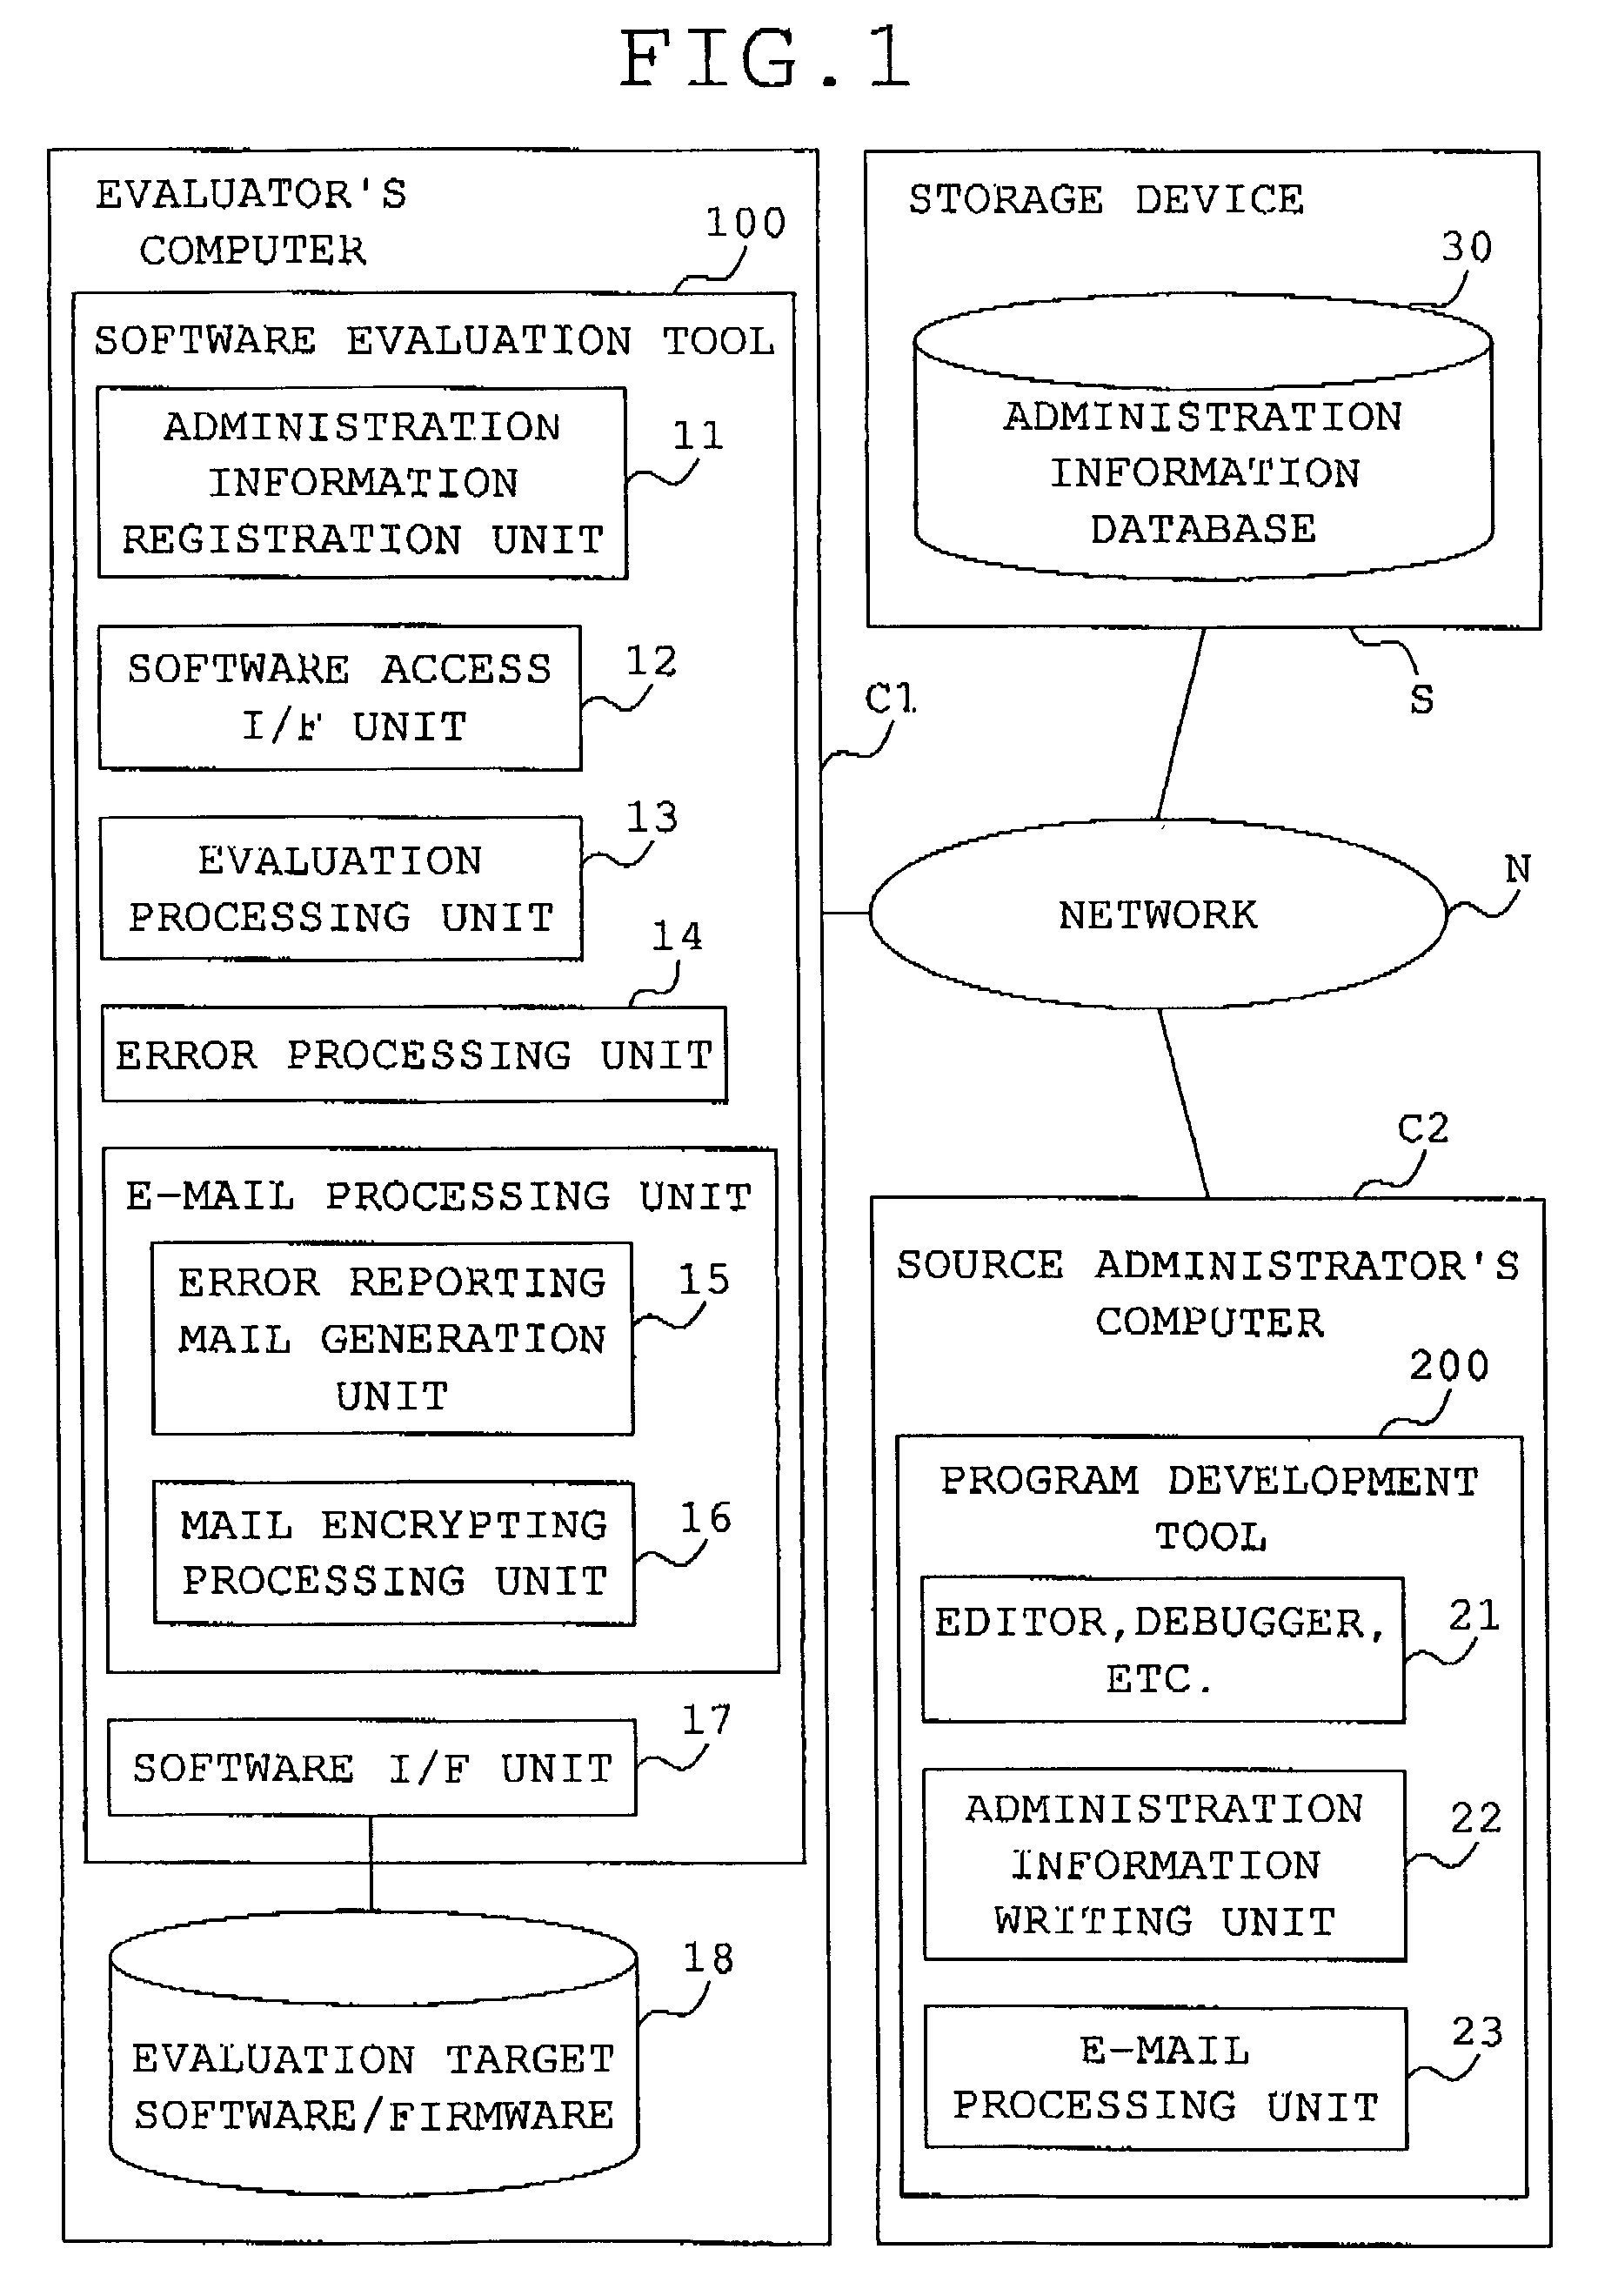 Software evaluation system having source code and function unit identification information in stored administration information